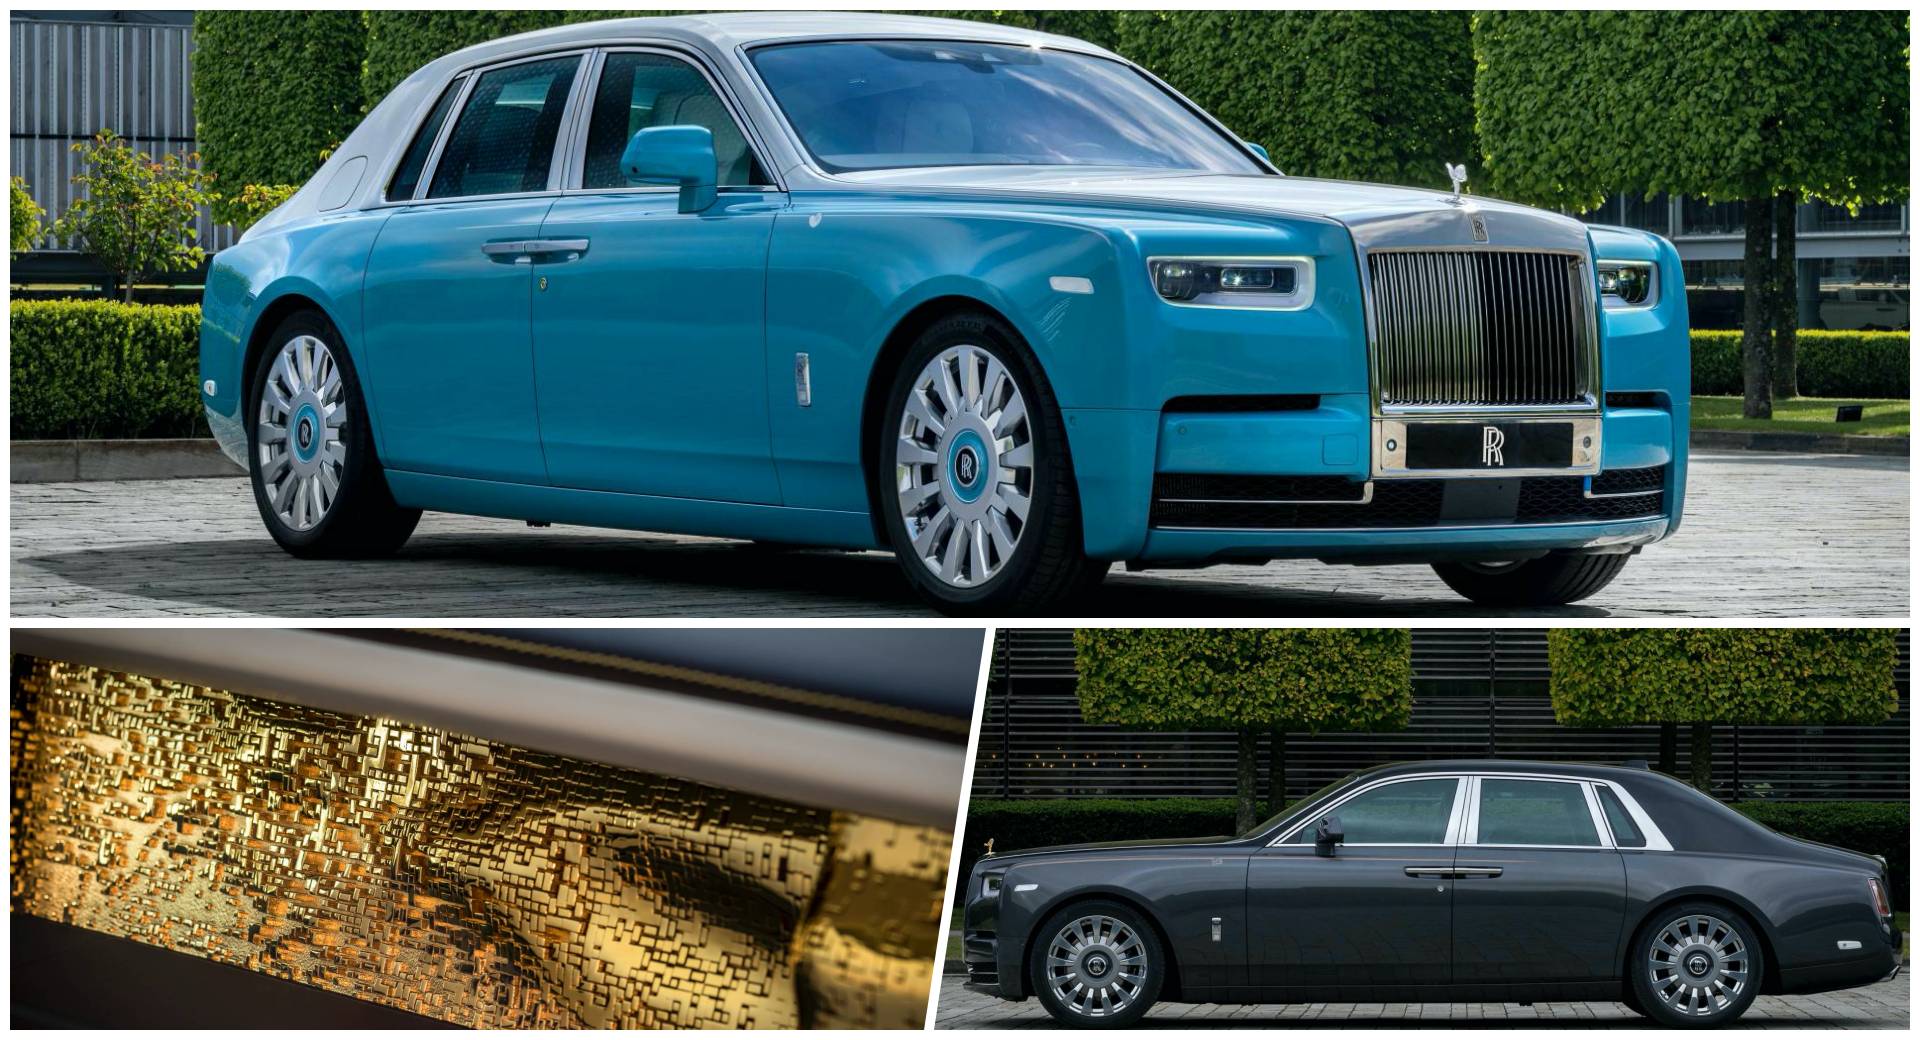 These Bespoke Phantoms Prove Rolls-Royce Has Elevated Car Making